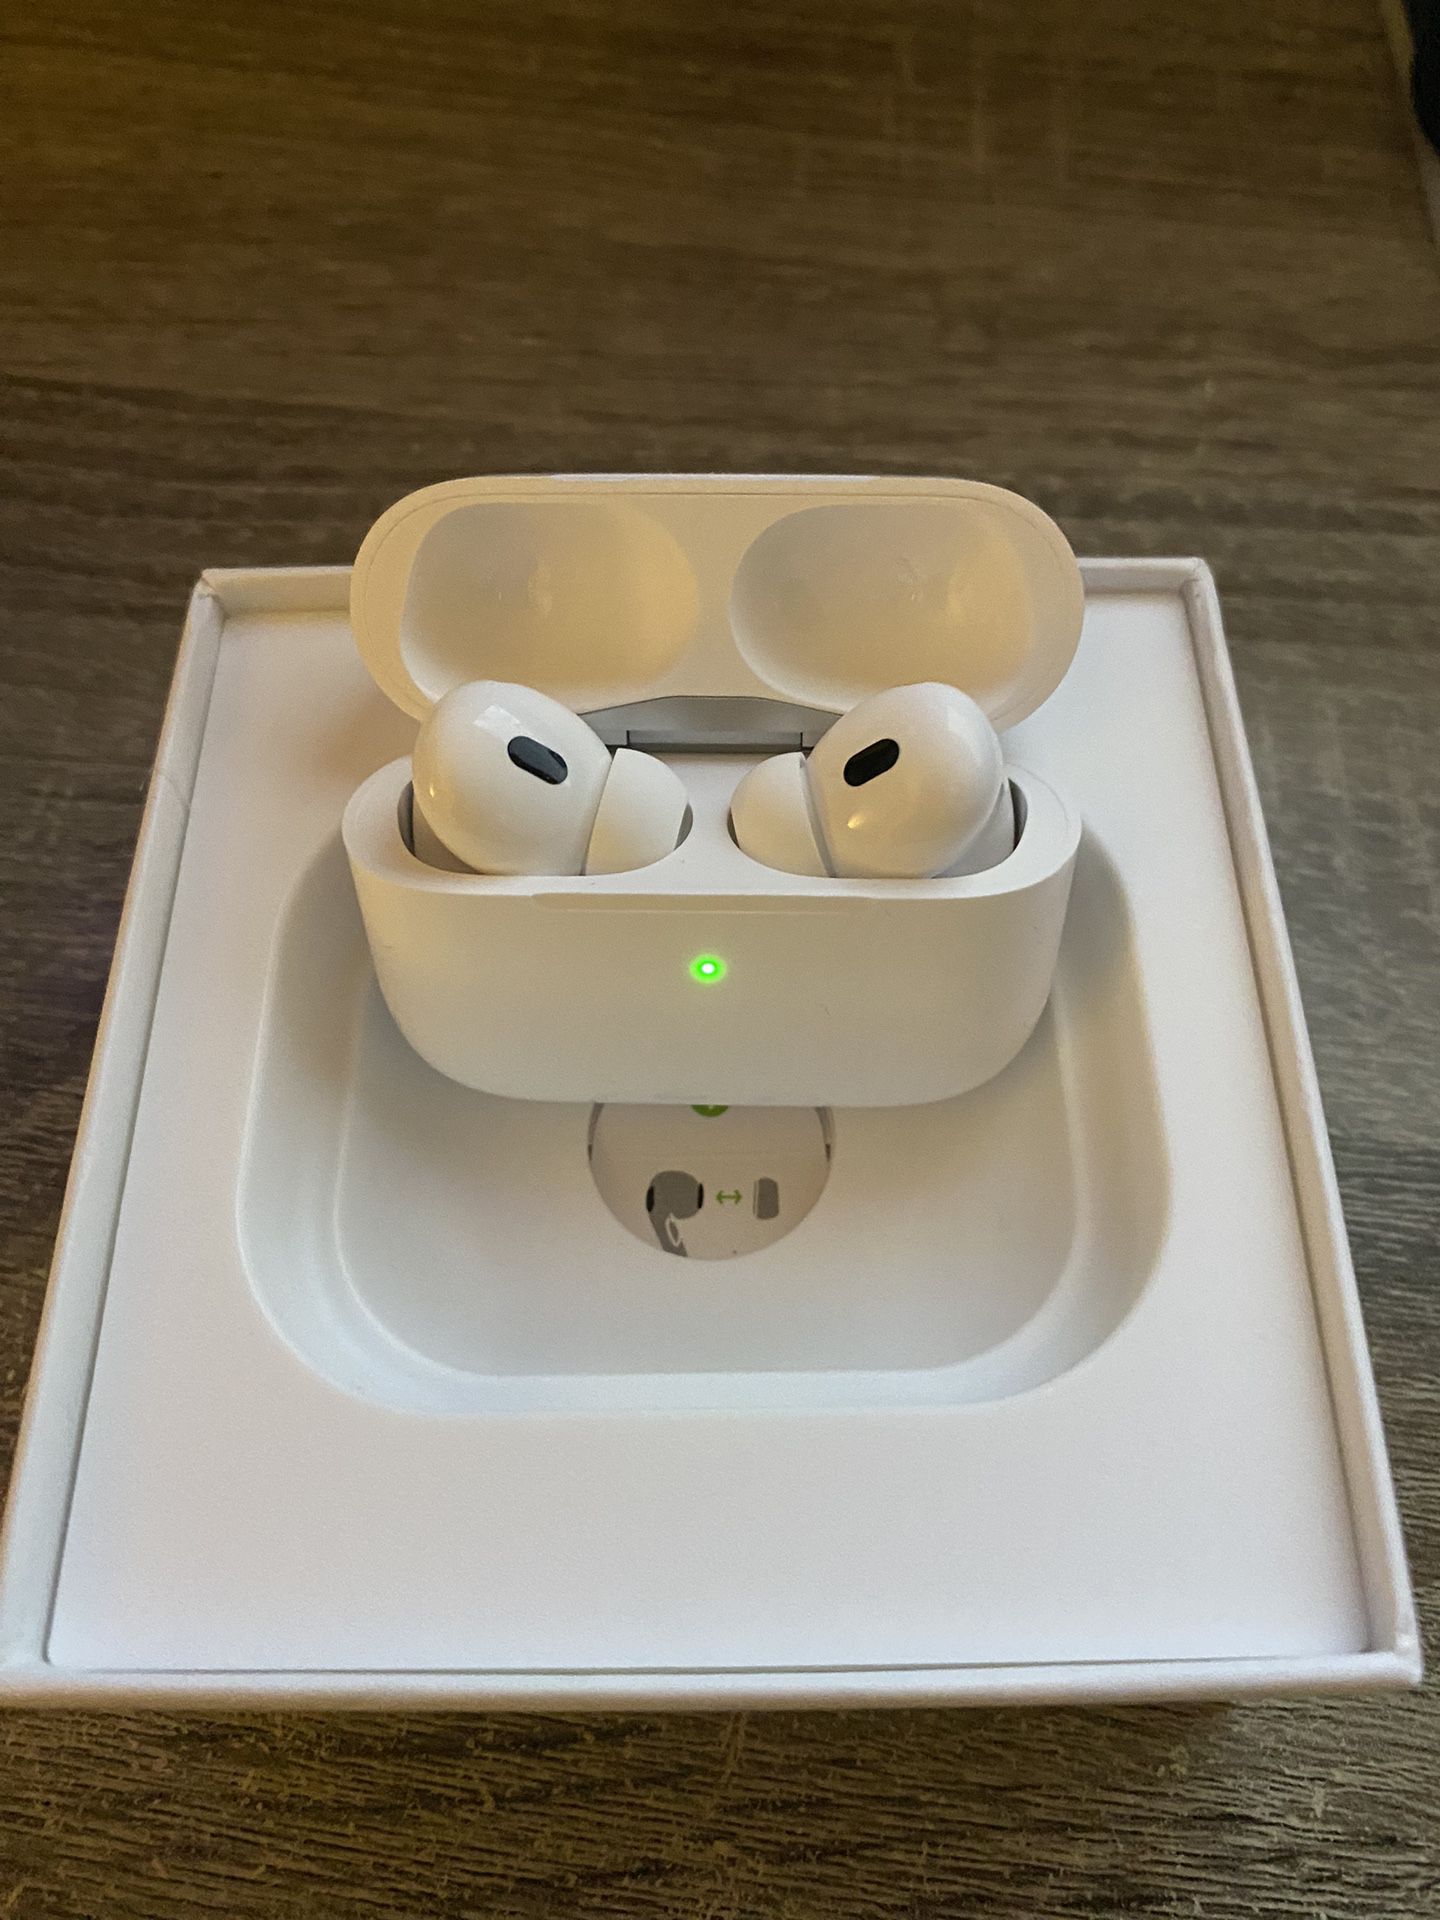 apple airpod pros 2nd generation 